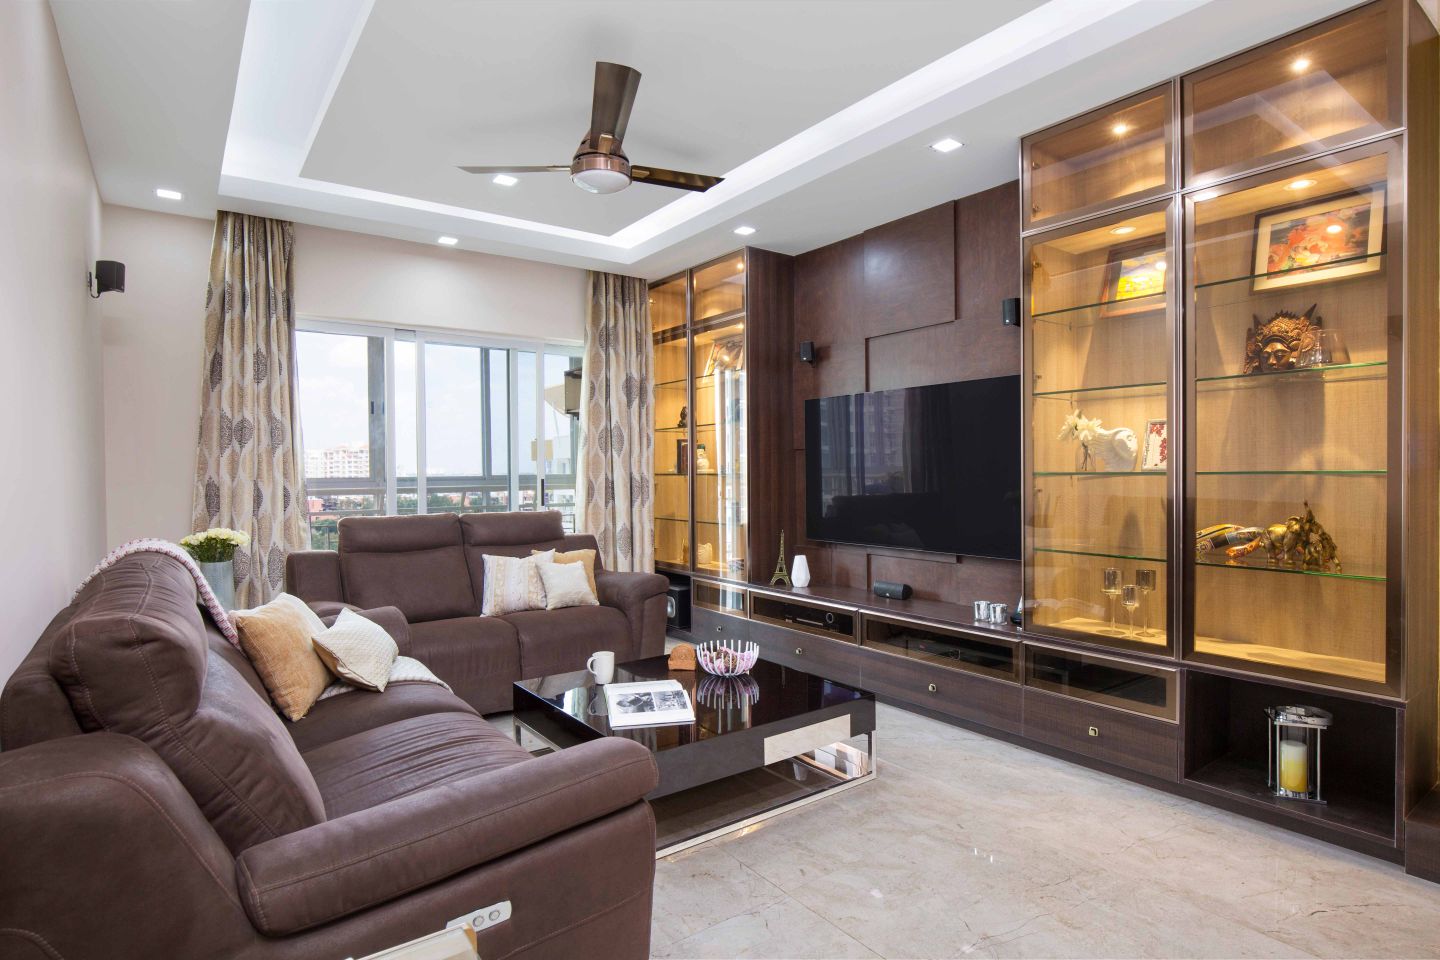 2-BHK Flat In Bangalore With Large Brown TV Cabinet Design And Glass Cabinet Storage - Livspace